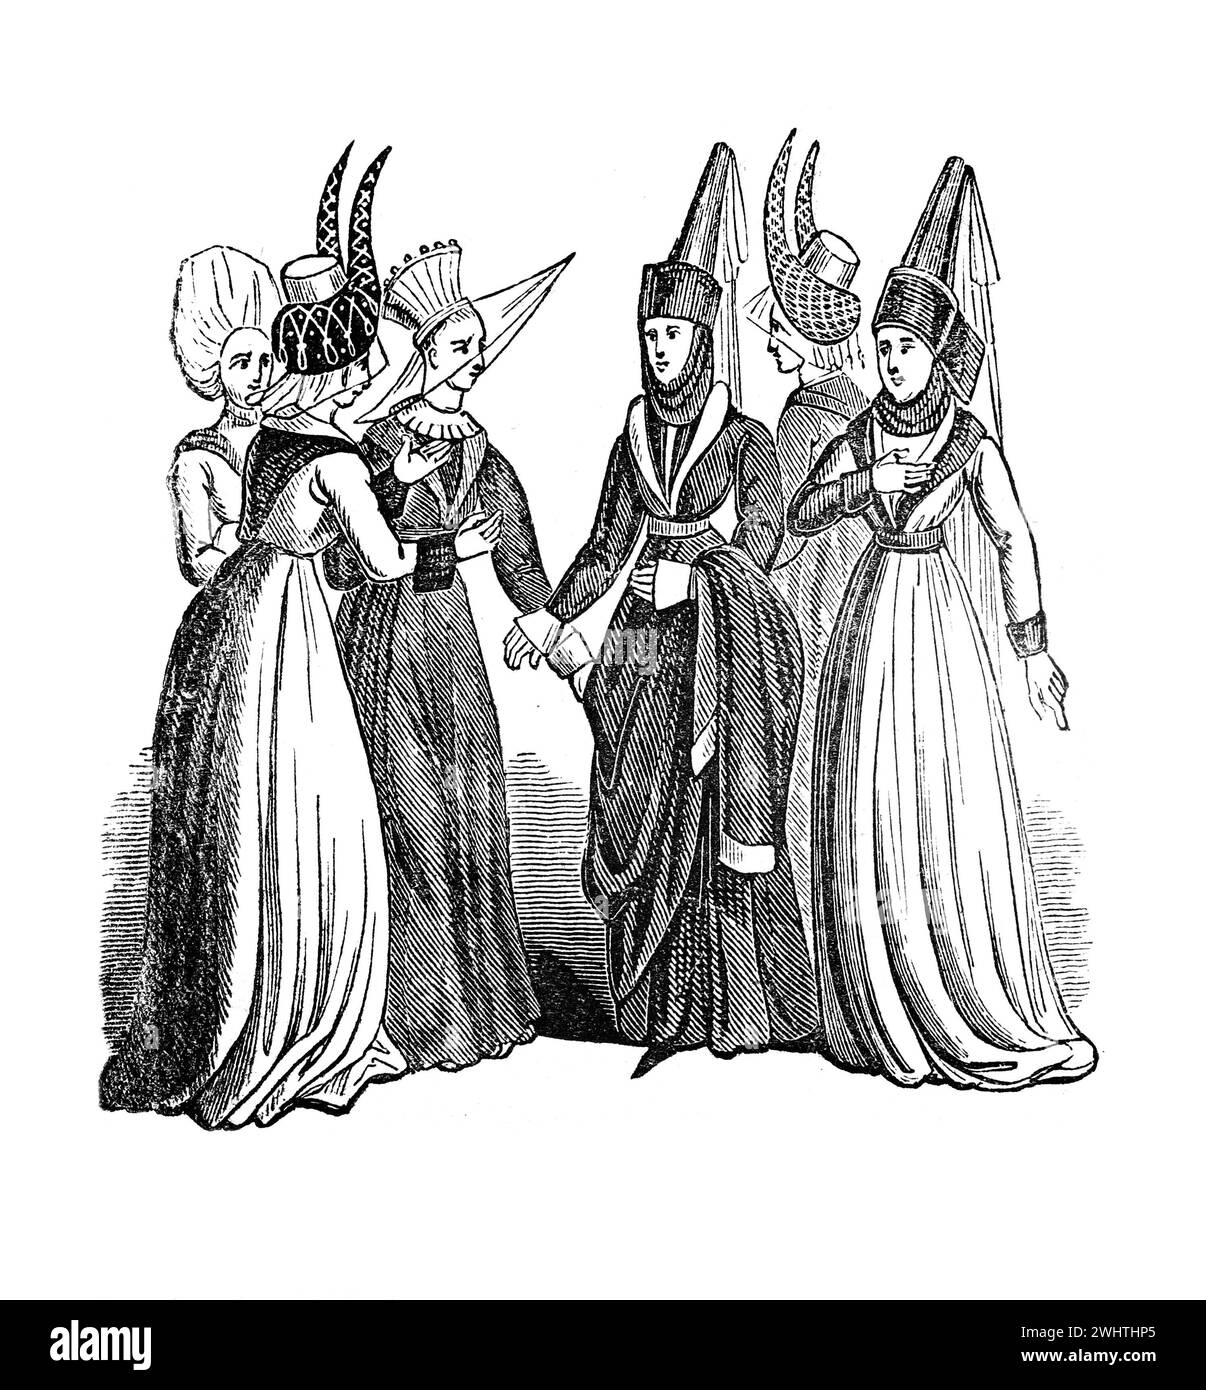 Female costume in the time of Edward IV. 15th Century England. Black and White Illustration from the "Old England" published by James Sangster in 1860. Stock Photo